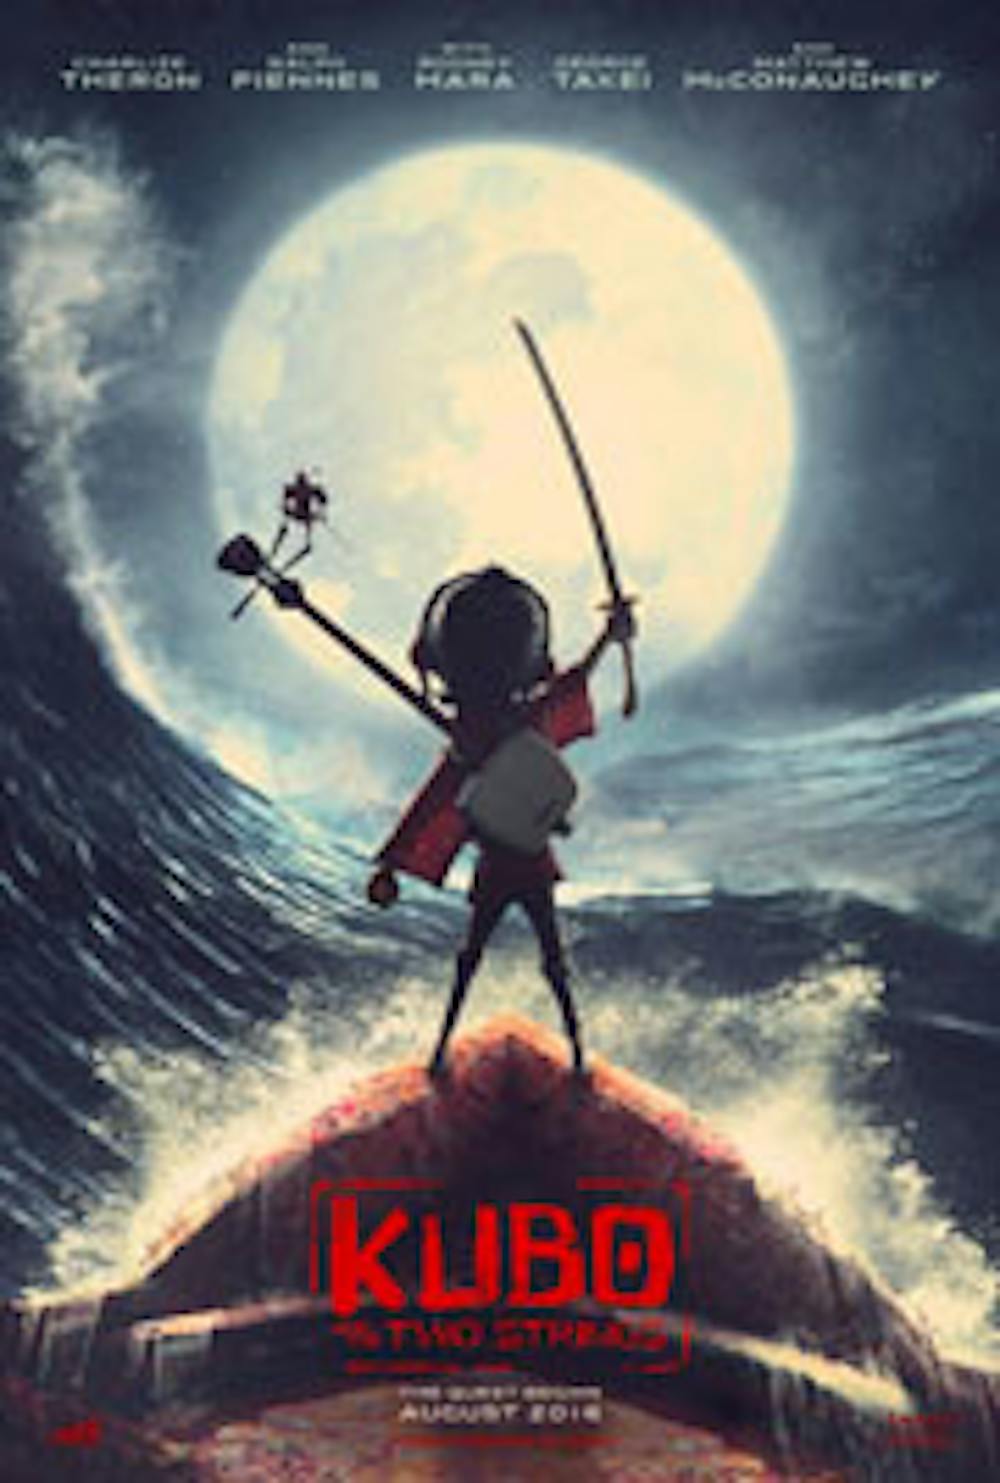 "Kubo and the Two Strings" uses computer and stop-motion animation to portray a young boy's thrilling quest for self discovery.